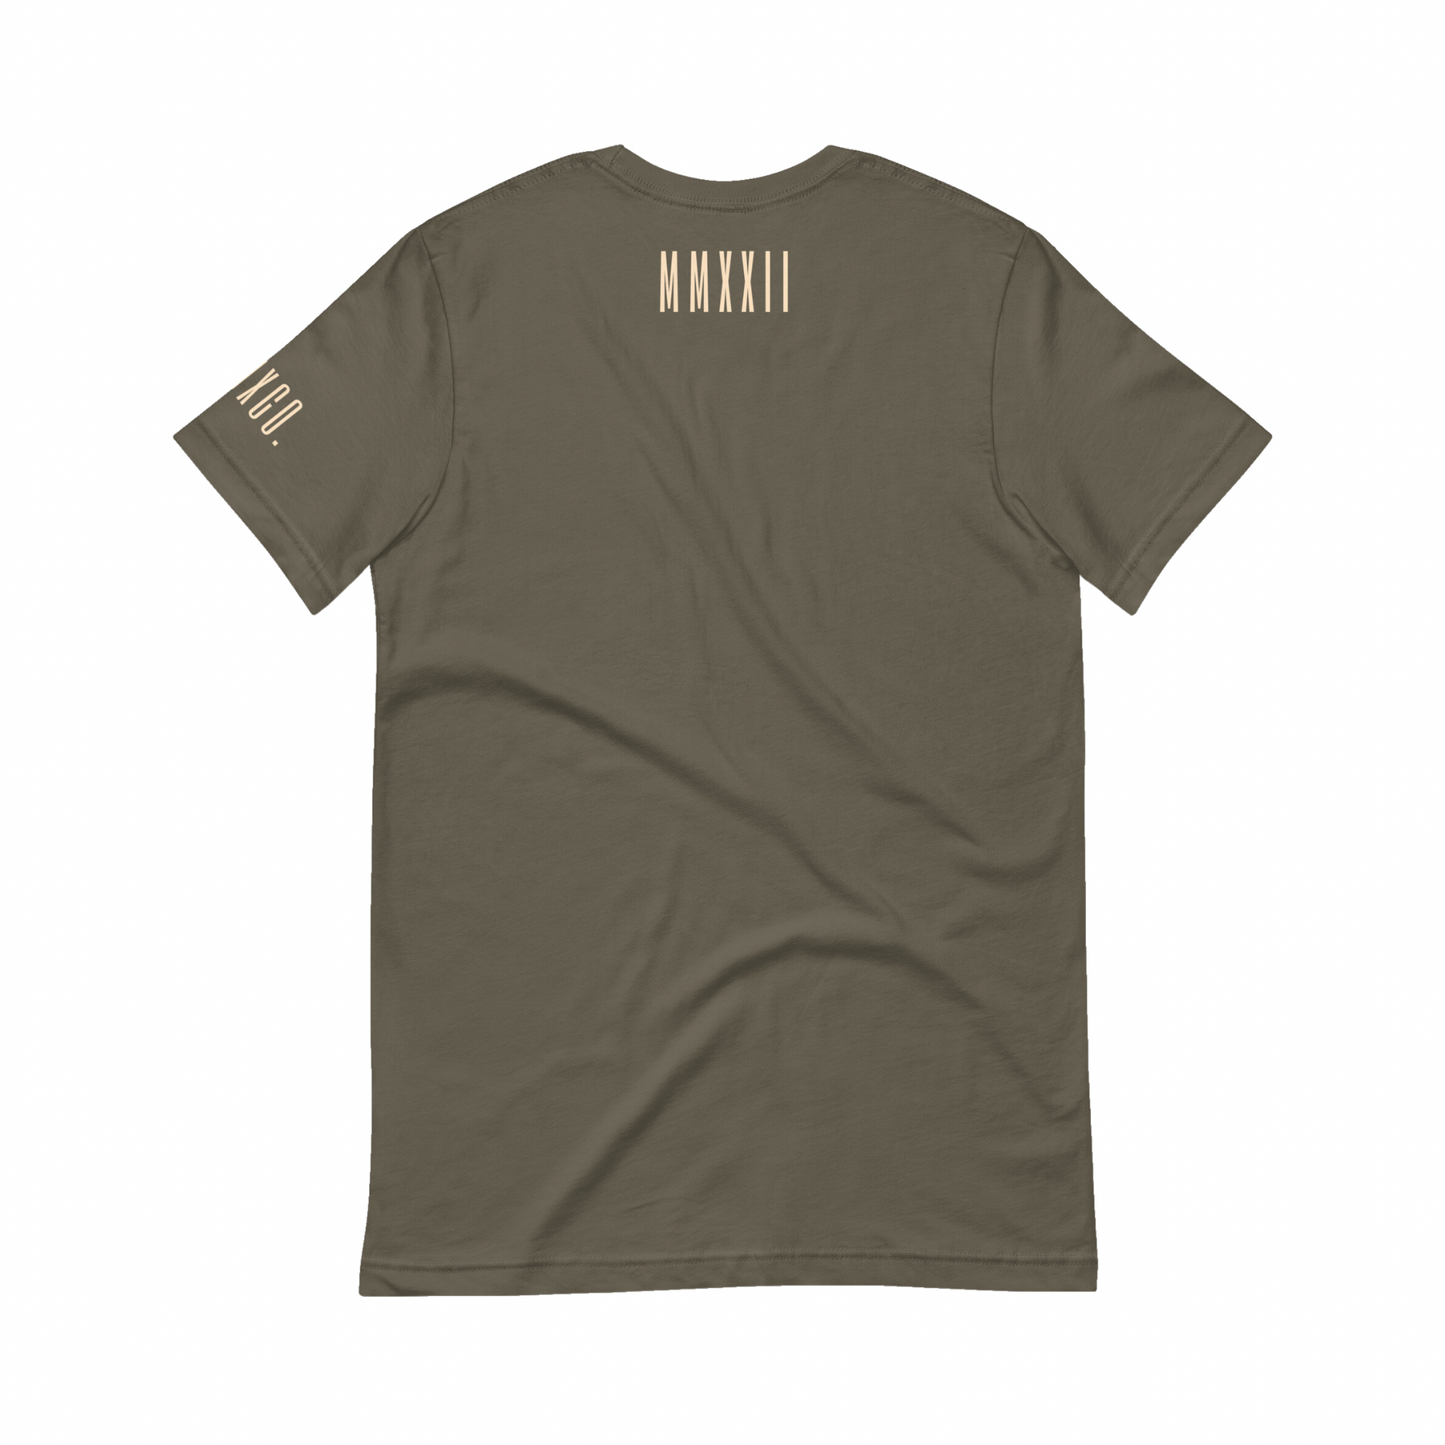 it’s already yours… army green